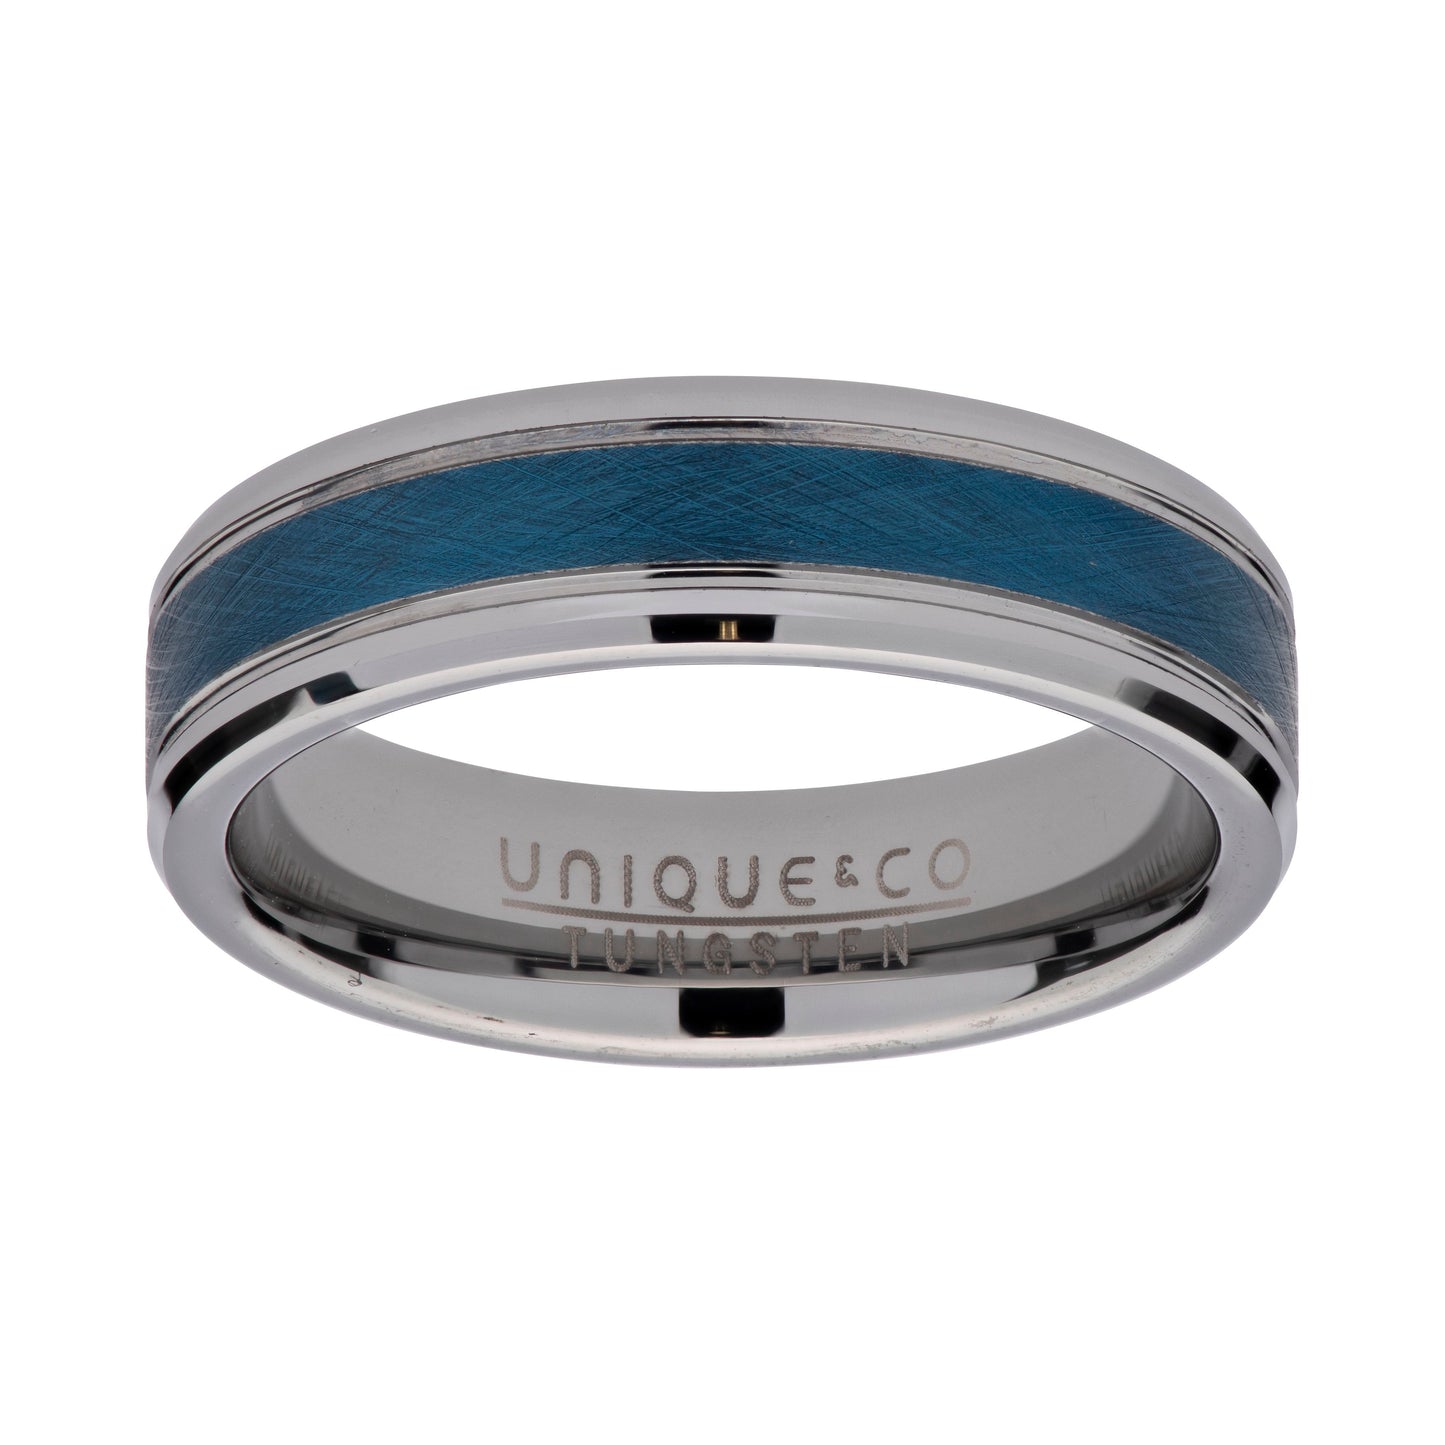 Gents tungsten ring with blue inlay